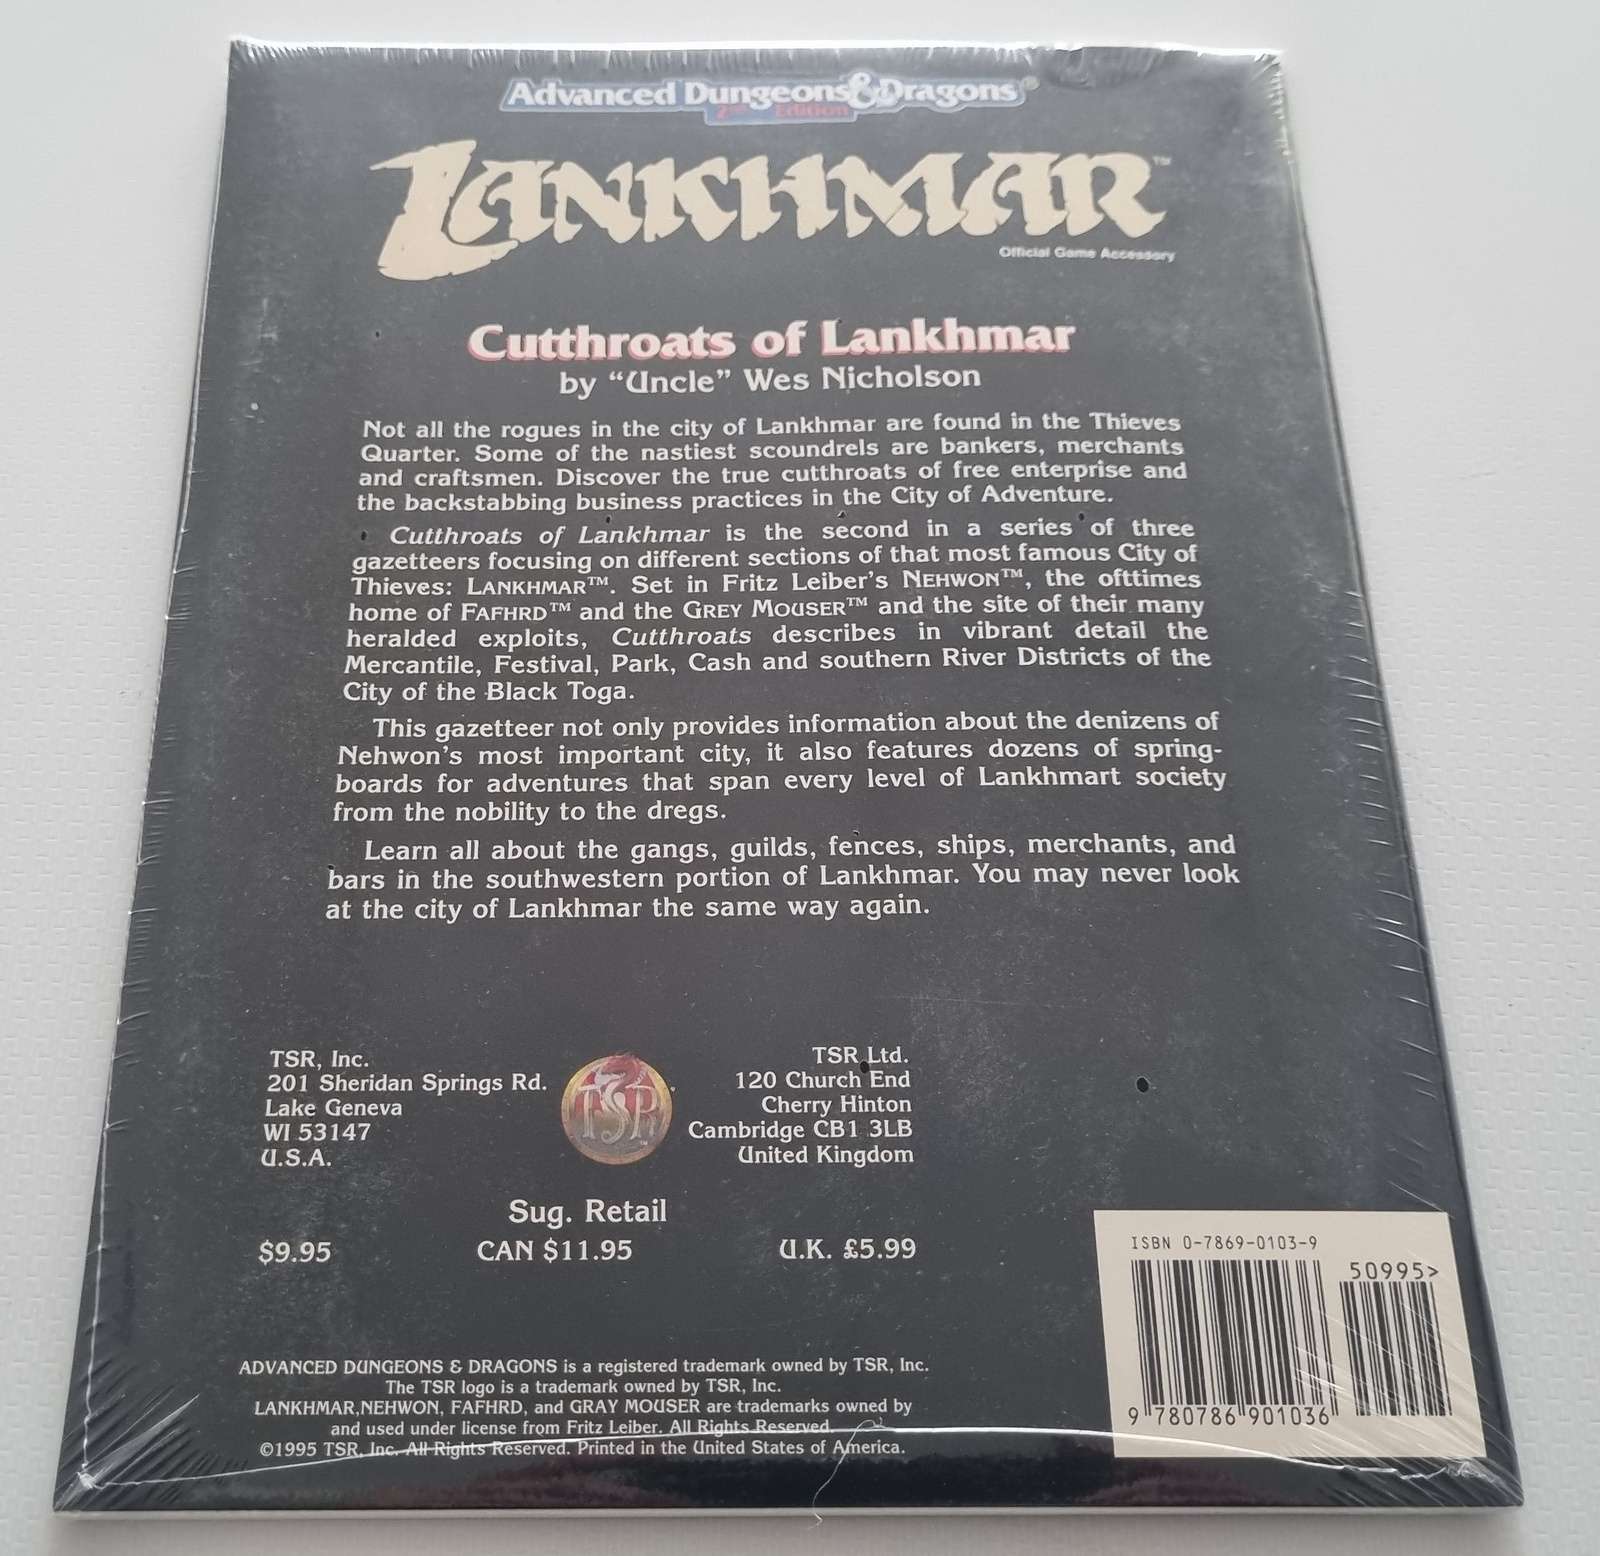 Advanced Dungeons & Dragons Module - Cutthroats of Lankhmar (Sealed)